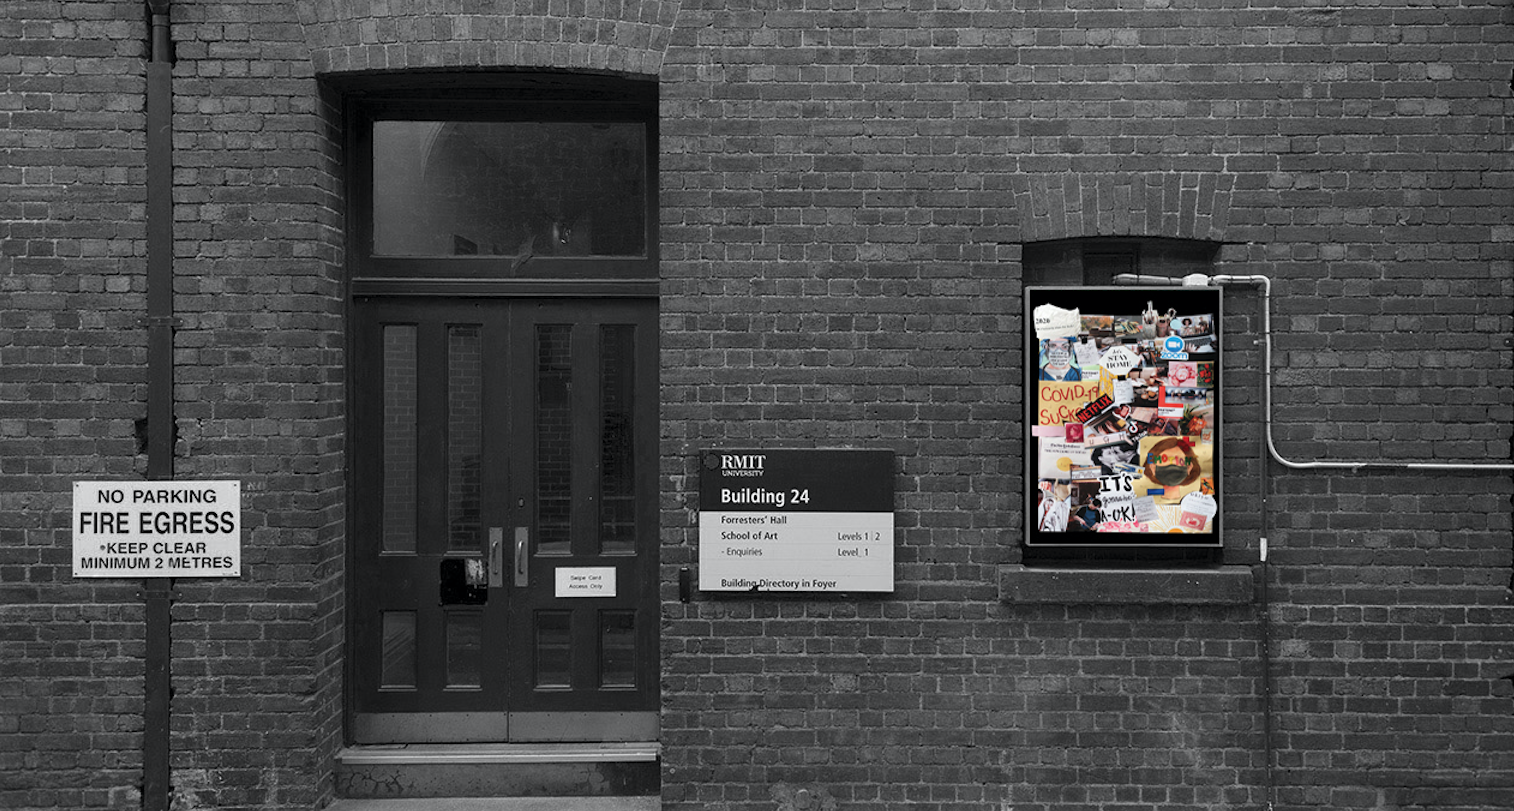 A mock-up of the artwork displayed on the Rodda Lane lightbox (2020), Curatorial Collective.